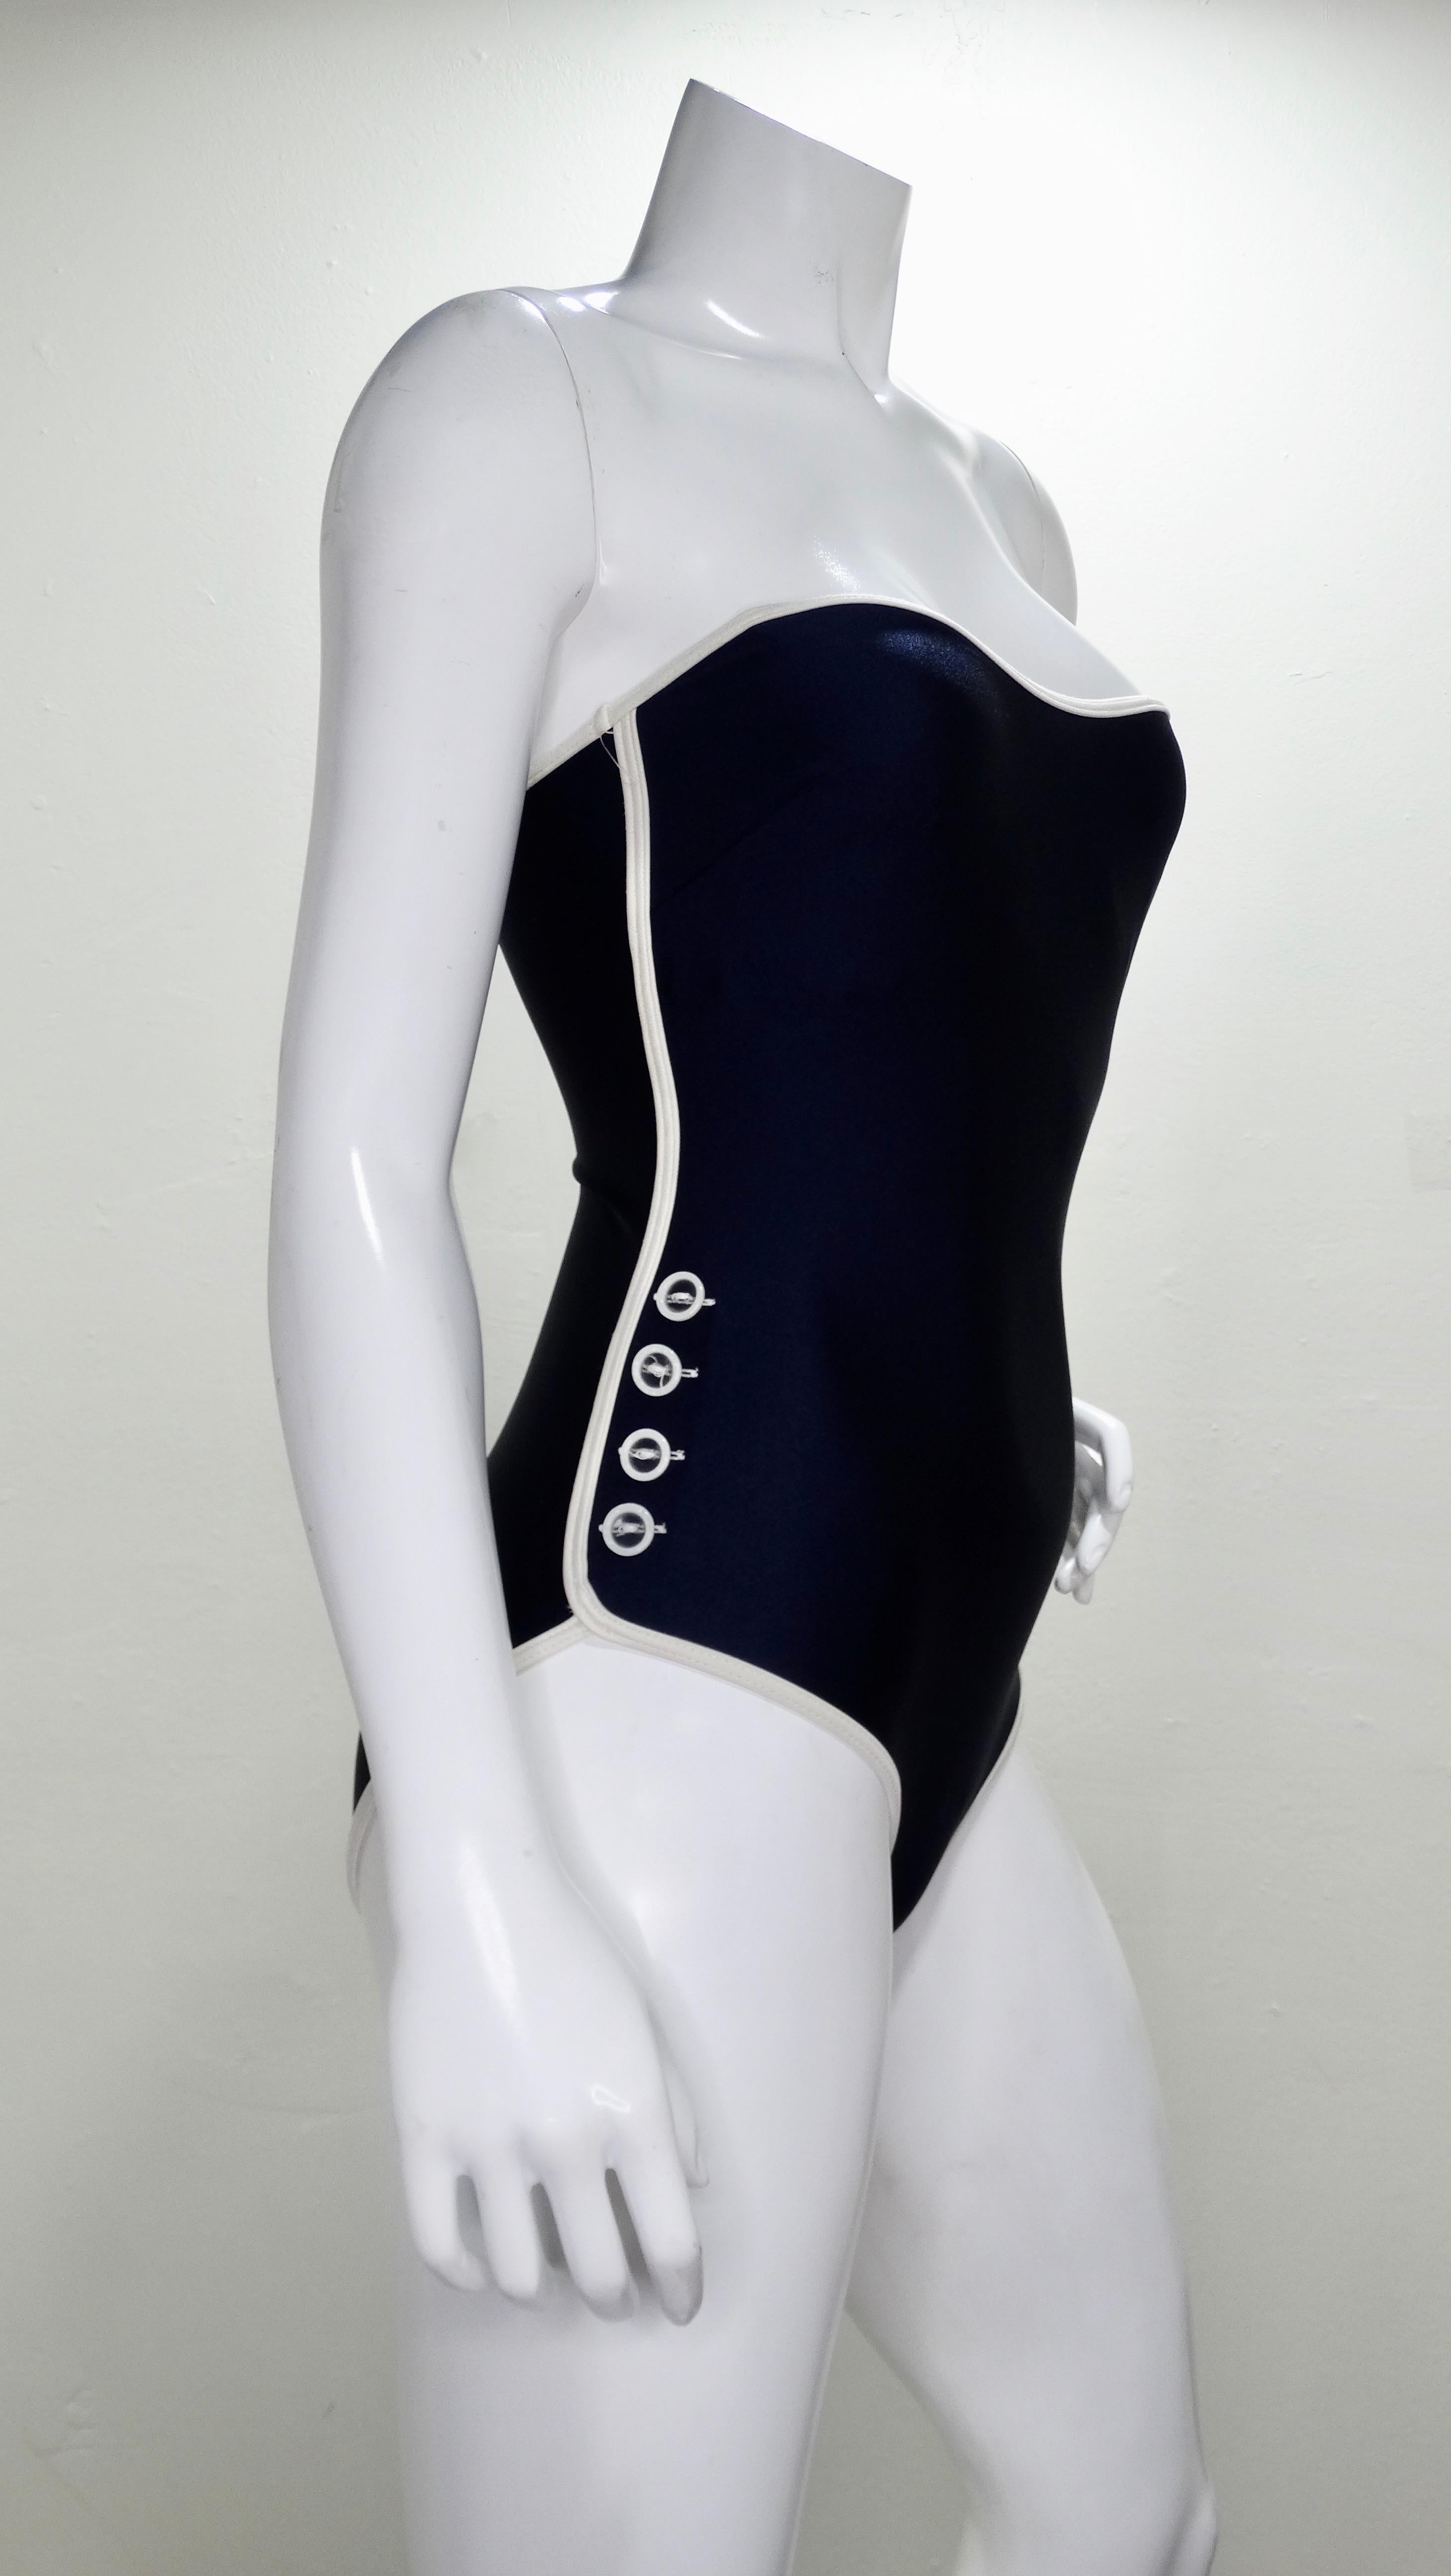 Be beach ready at all times with this adorable Gottex one piece swimsuit! Circa 1990s with a little 1950s influence, this strapless navy blue swimsuit features a white trim with buttons going down the hip. Interior includes a built in bustier.